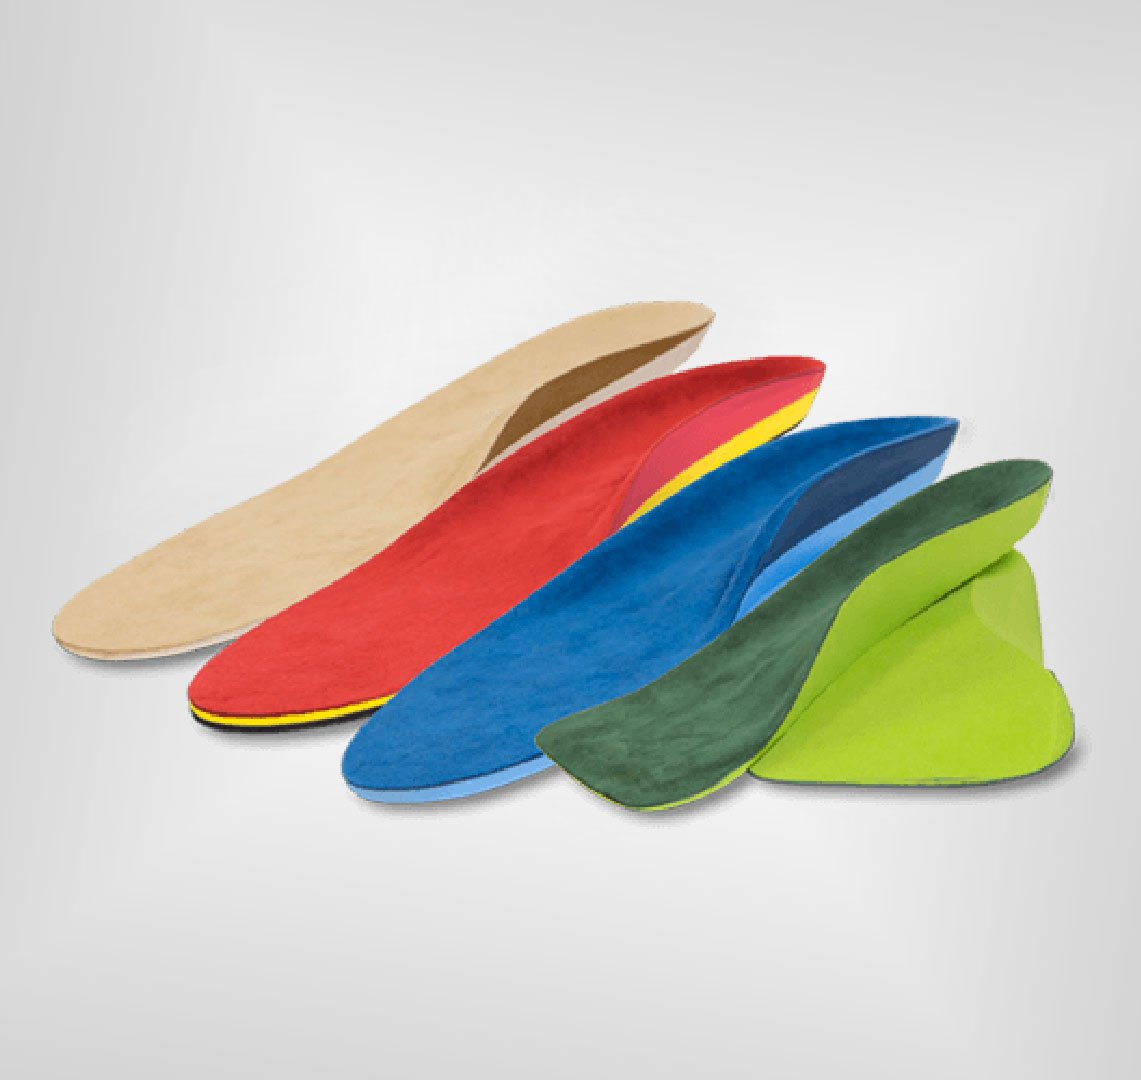 Insoles produced by CAD / CAM method